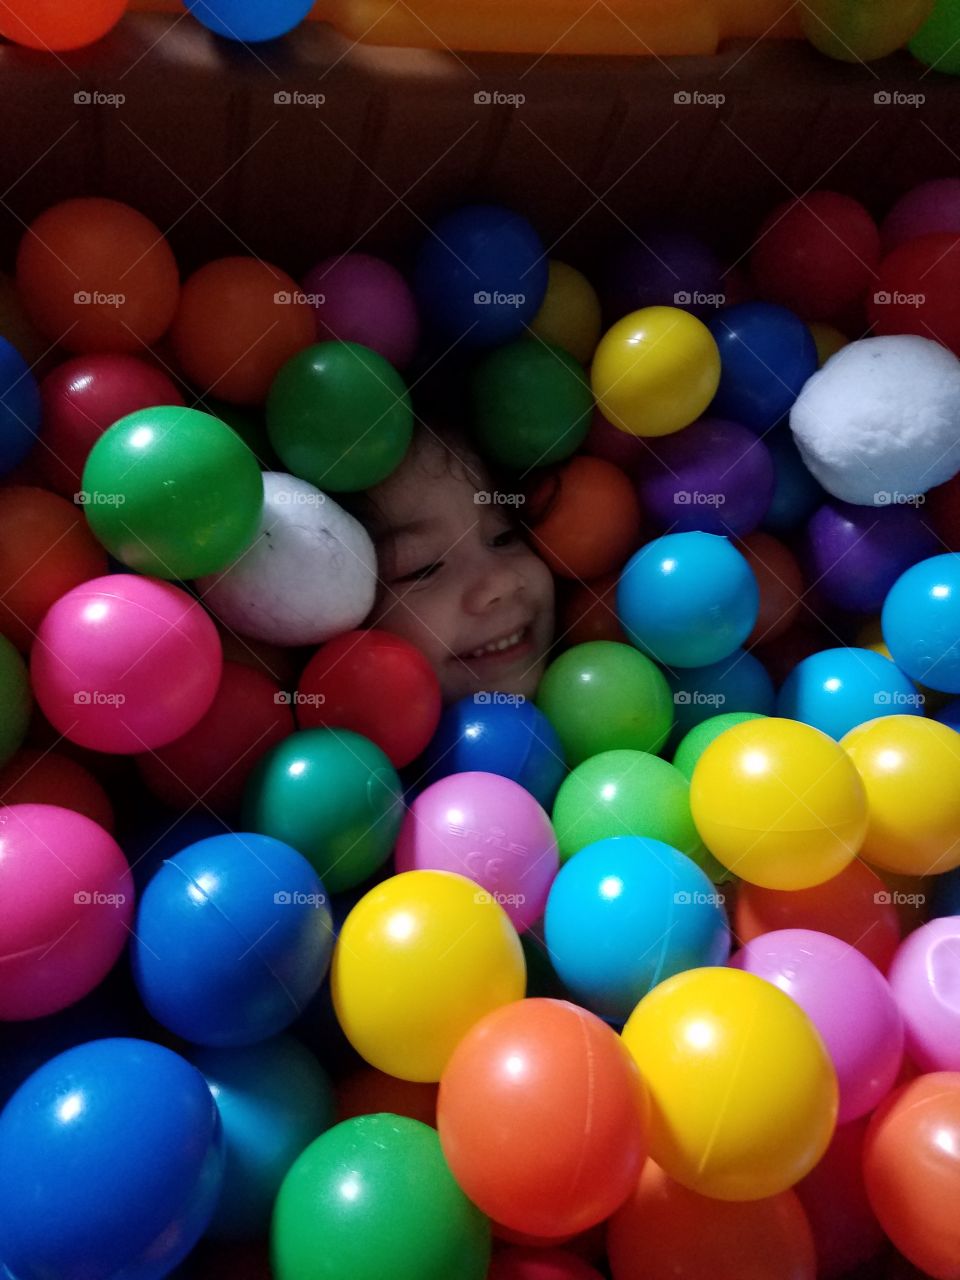 Buried in the ball pit!